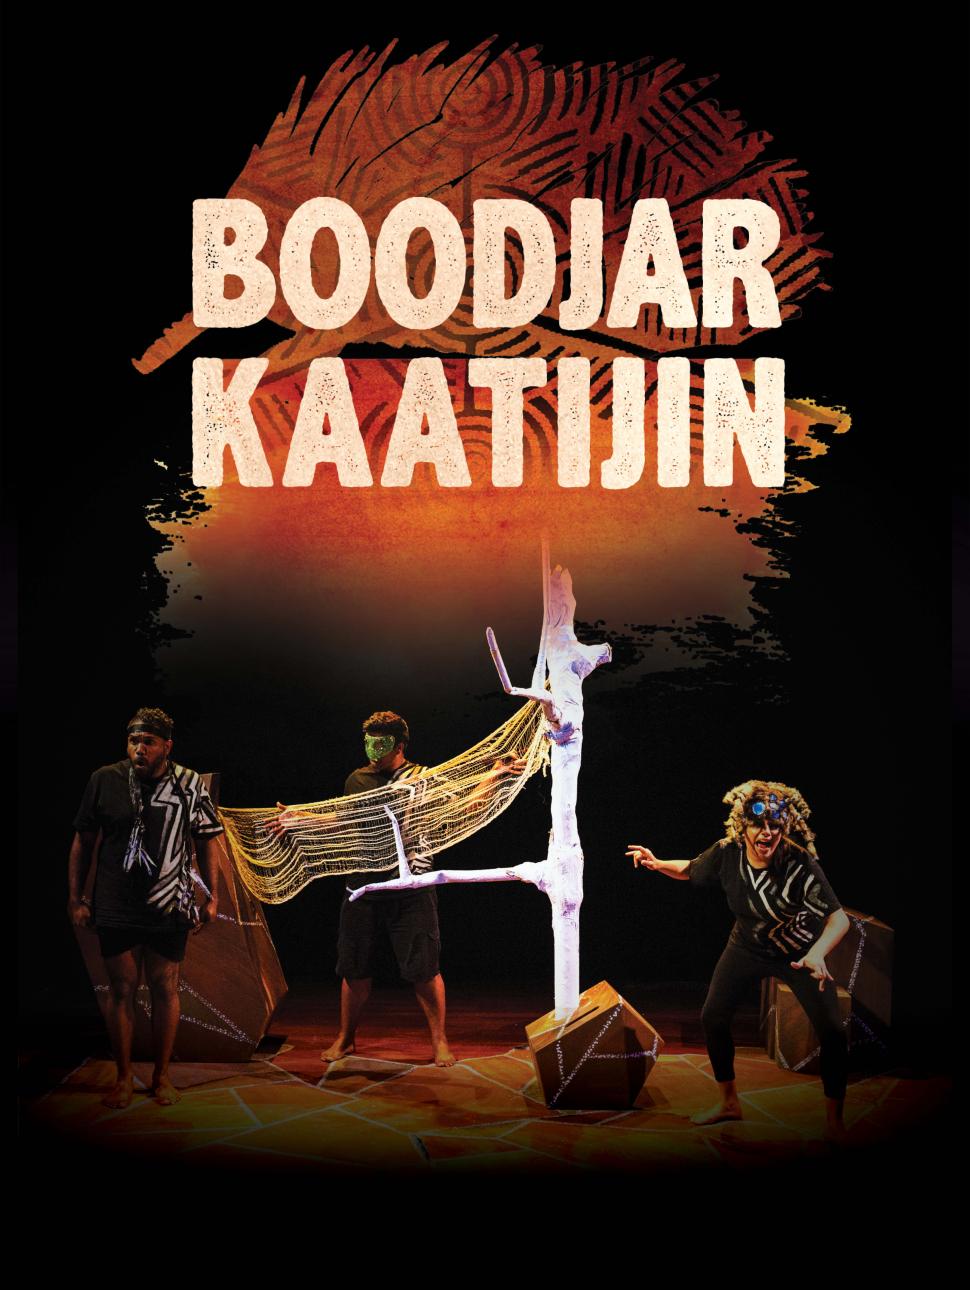 Yirra Yaakin Theatre Company presents Boodjar Kaatijin, a performance for young people about Noongar country and story traditions.  This scene features two performers holding a net on the left side from a central, stark white tree, with another performer crouching expressively on the right hand side of the tree.